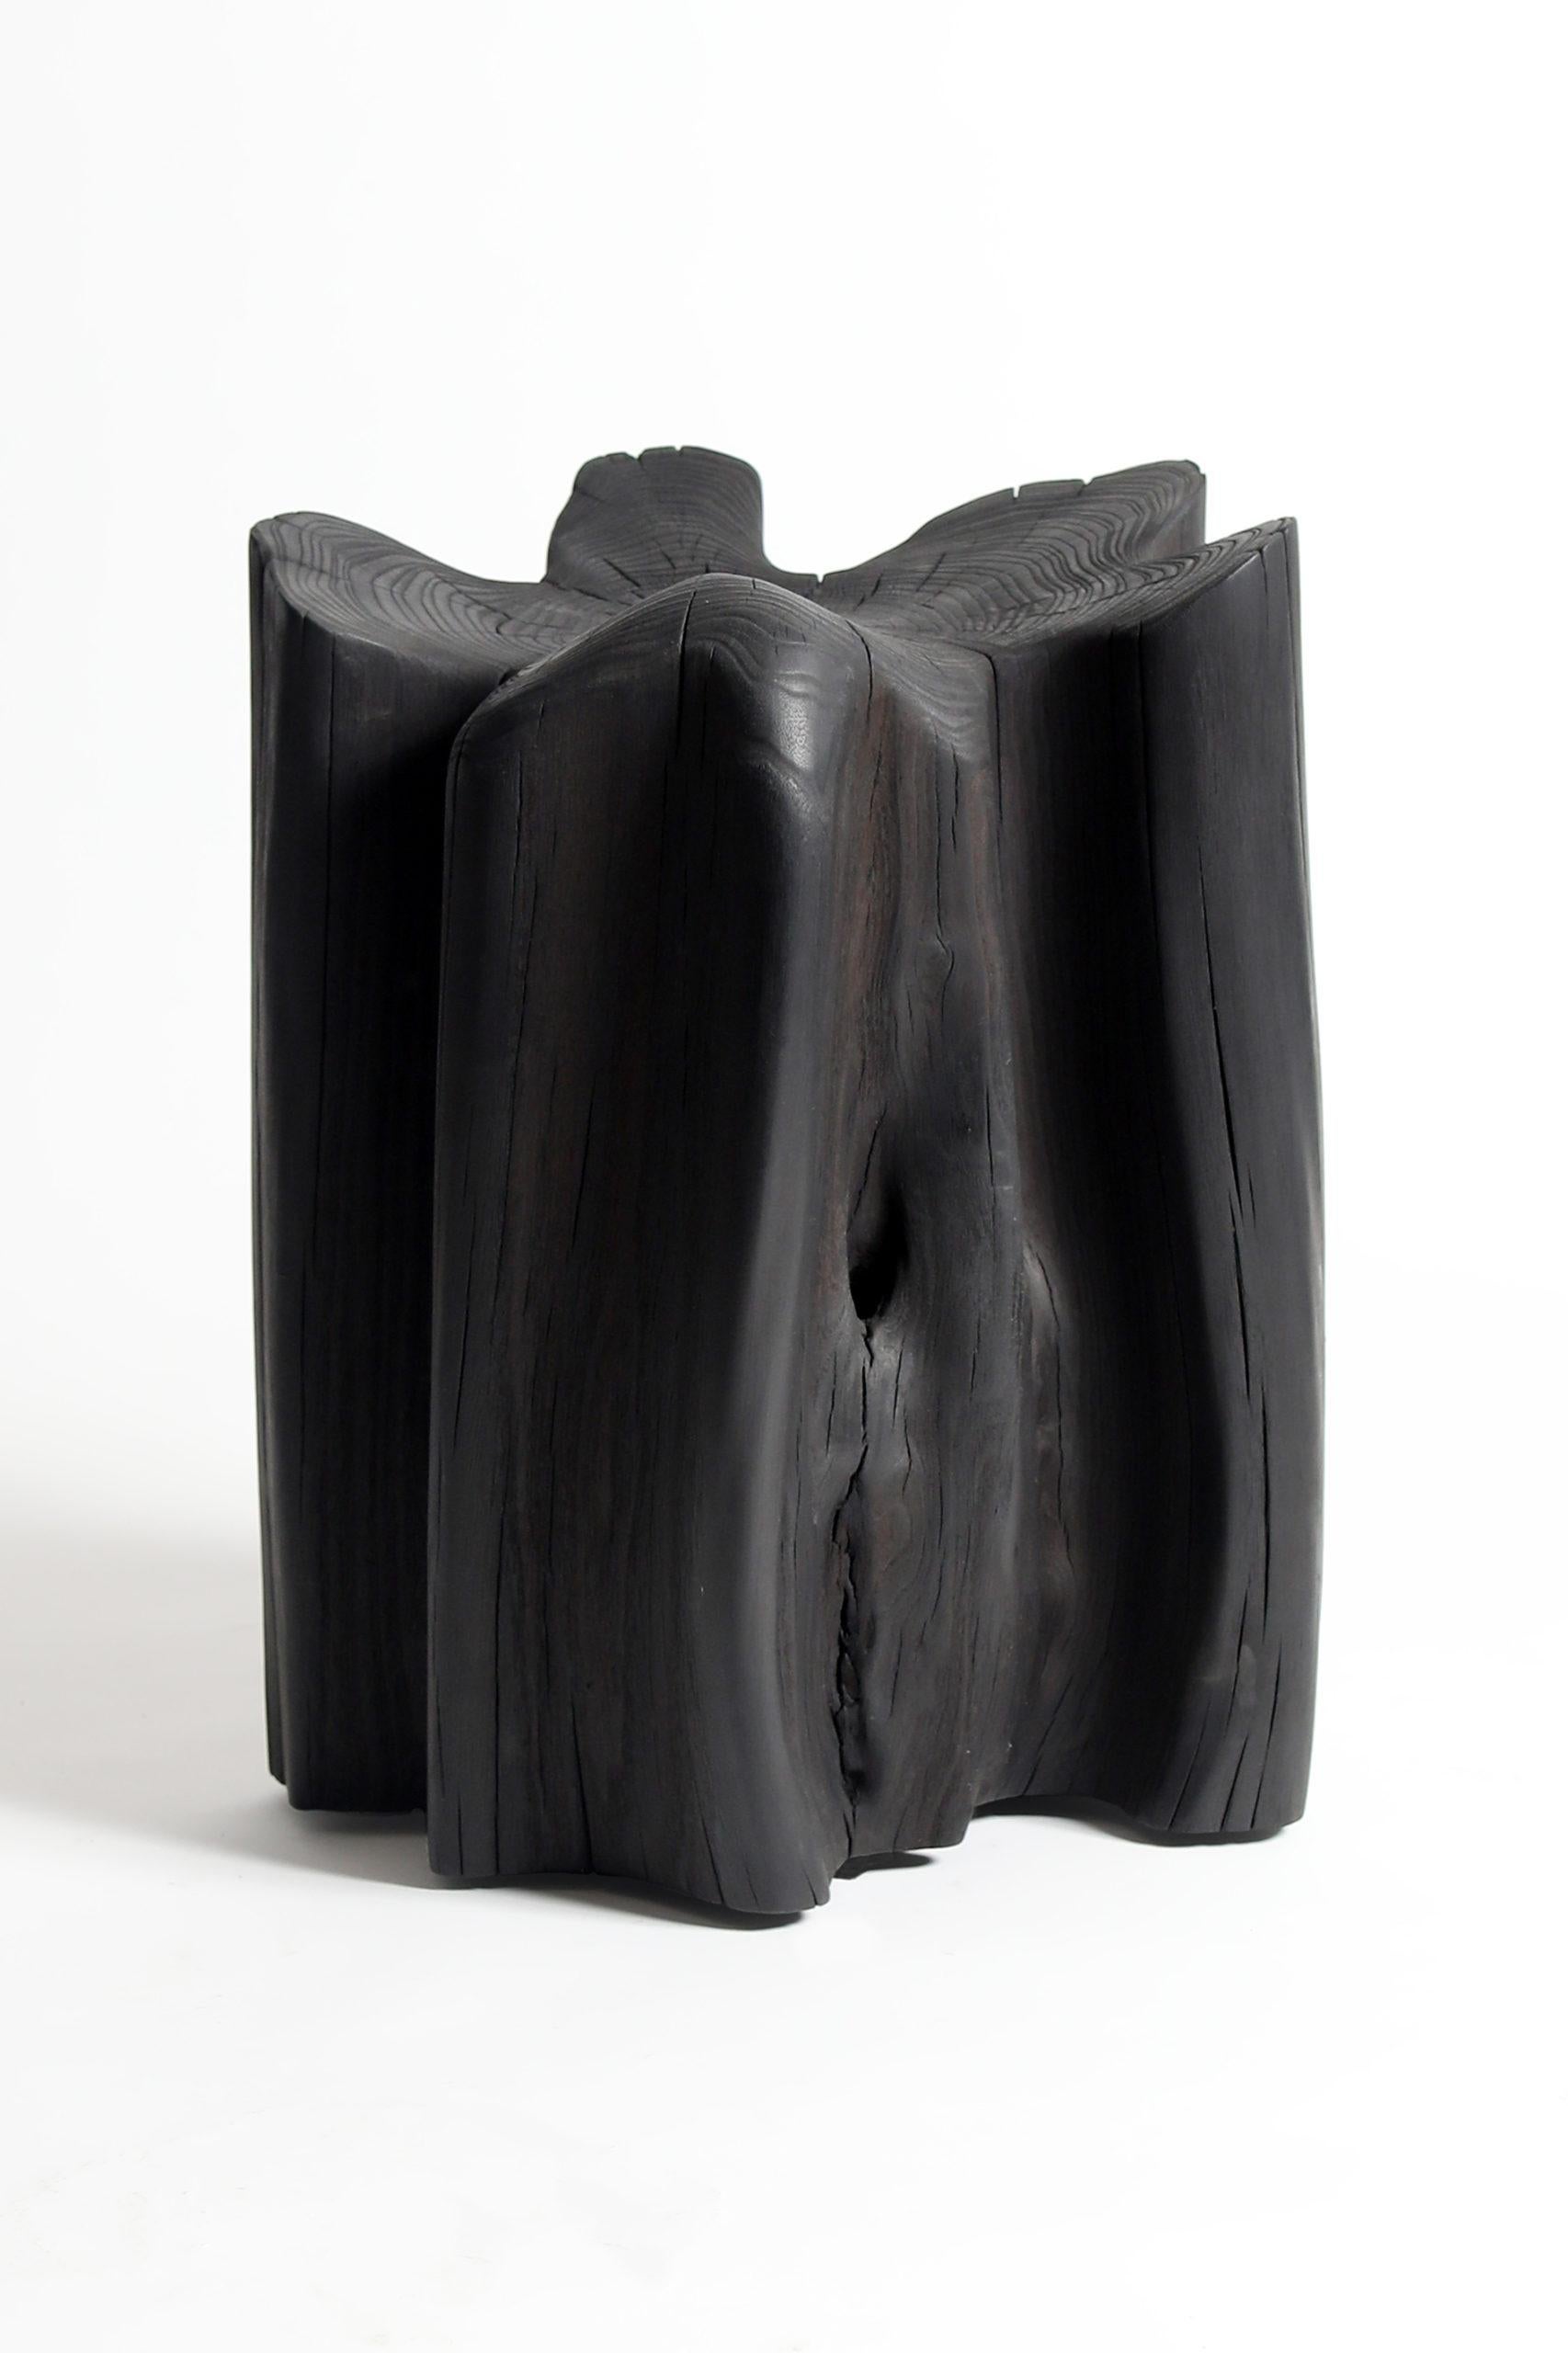 Modern Black Wooden Stool, Burned Chunk by Jesse Sanderson for Wdstck In New Condition For Sale In Warsaw, PL